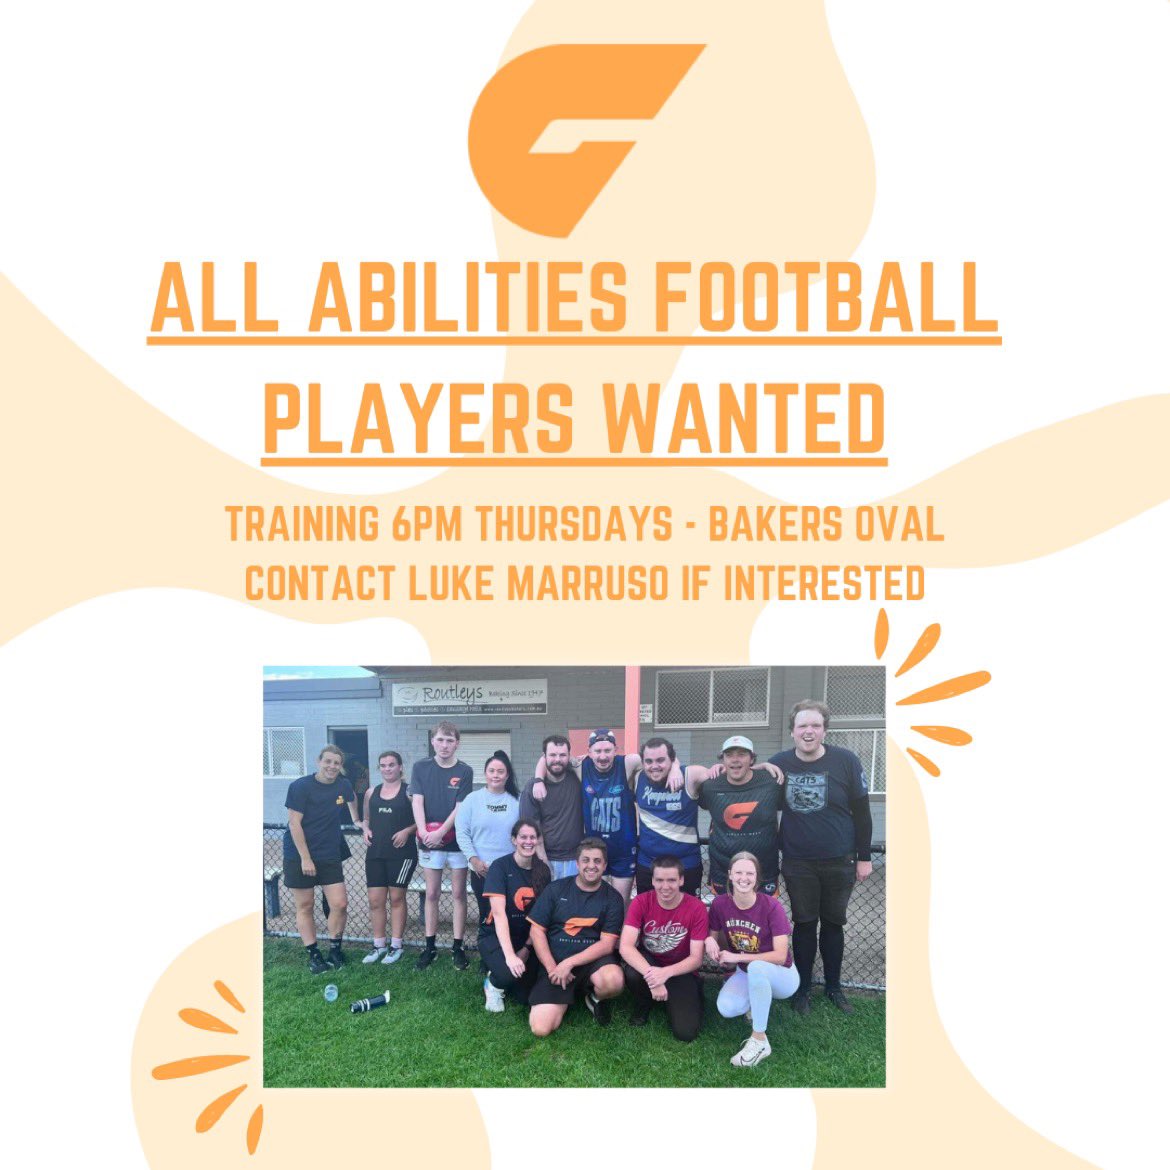 Coaching the @GeelongWGiants All Abilities Fooy side this year and couldn’t be more excited. Please feel free to share this post or contact me or the club if you know anyone that wants to get involved. It’s going to be amazing #localfooty #GeelongWestGiants #AllAbility